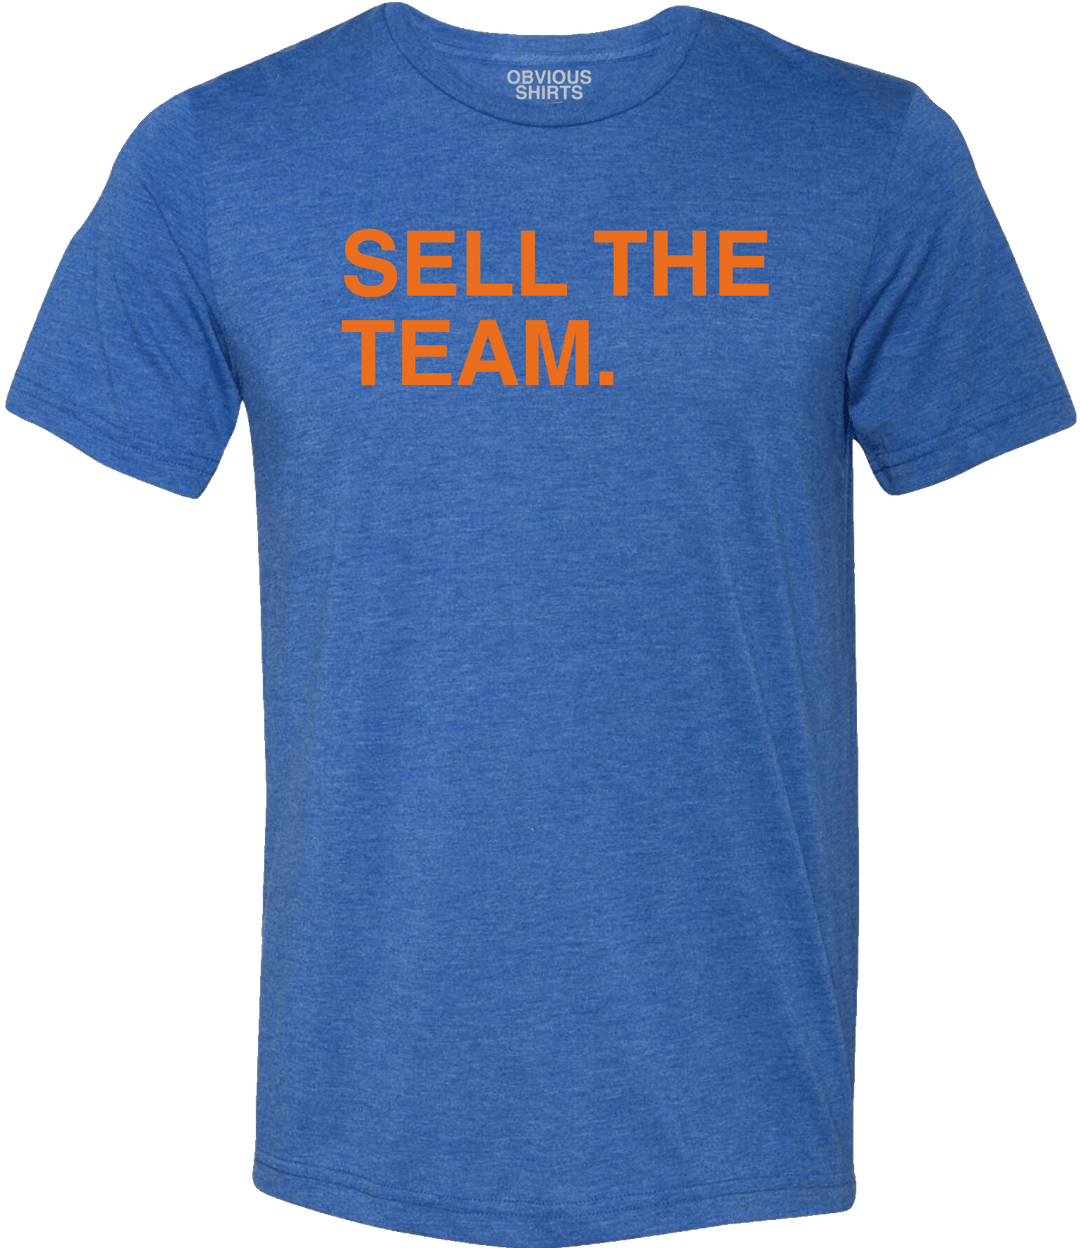 SELL THE TEAM. - OBVIOUS SHIRTS.